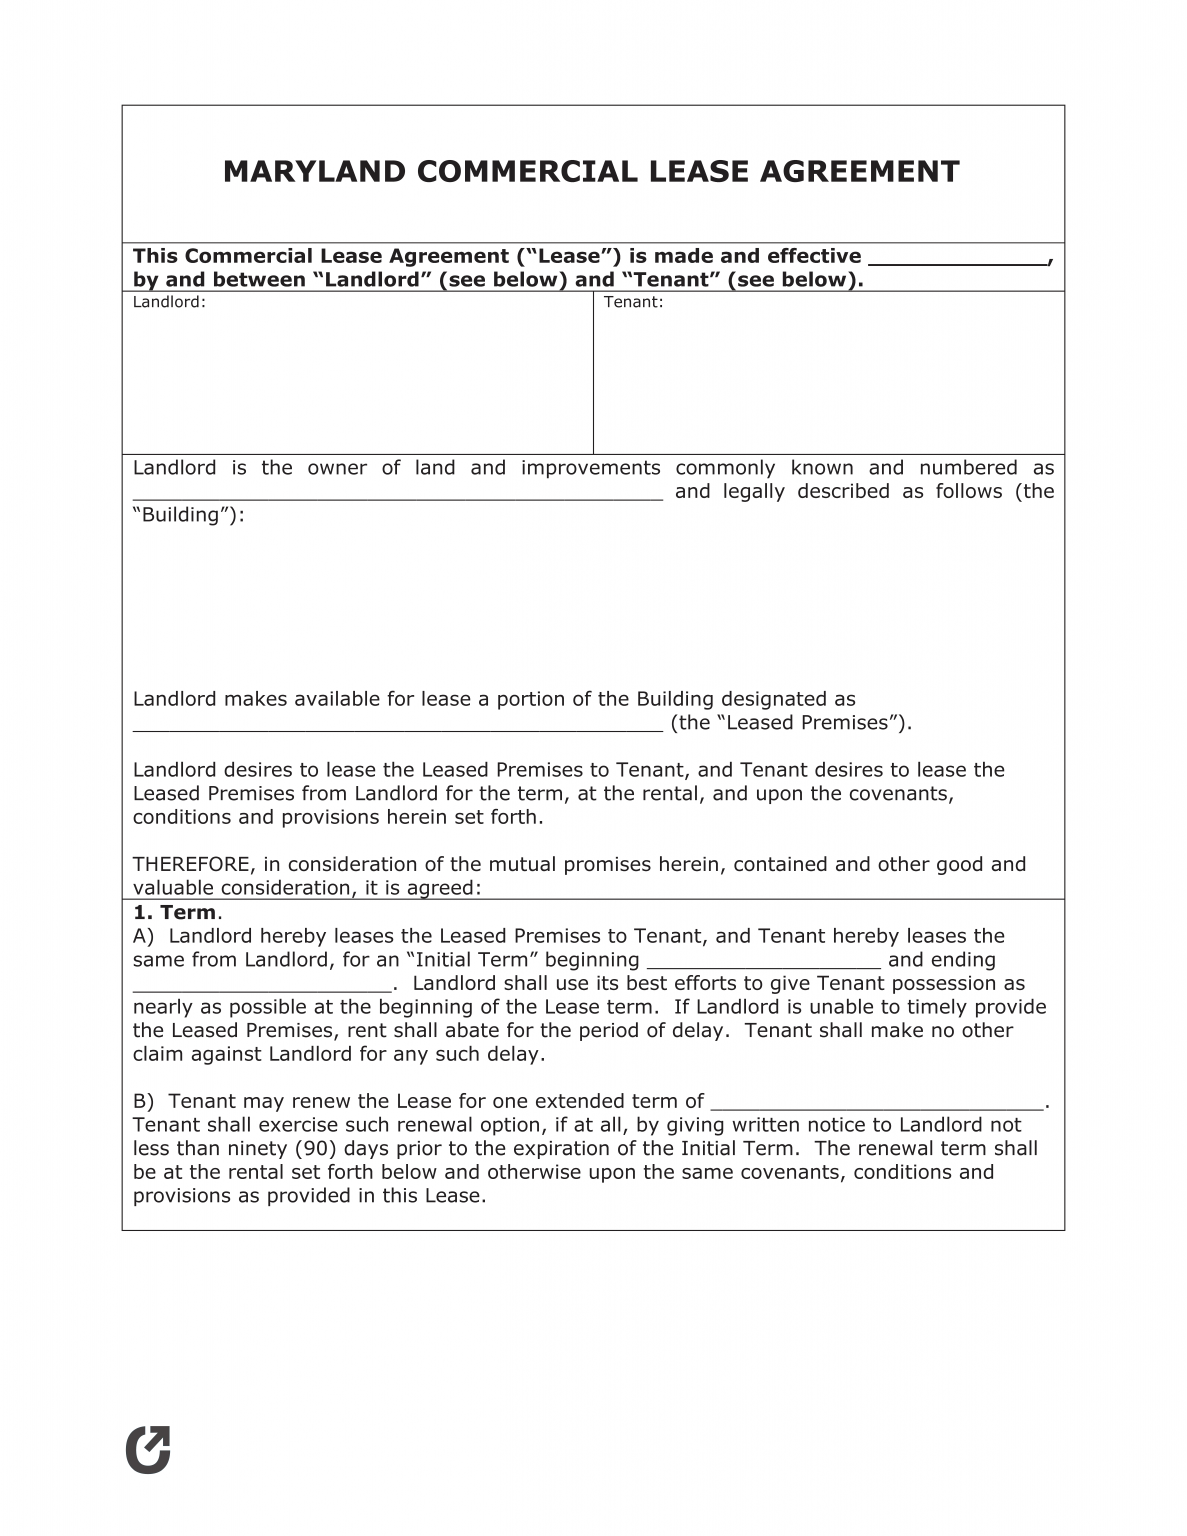 free-maryland-standard-residential-lease-agreement-template-pdf-word